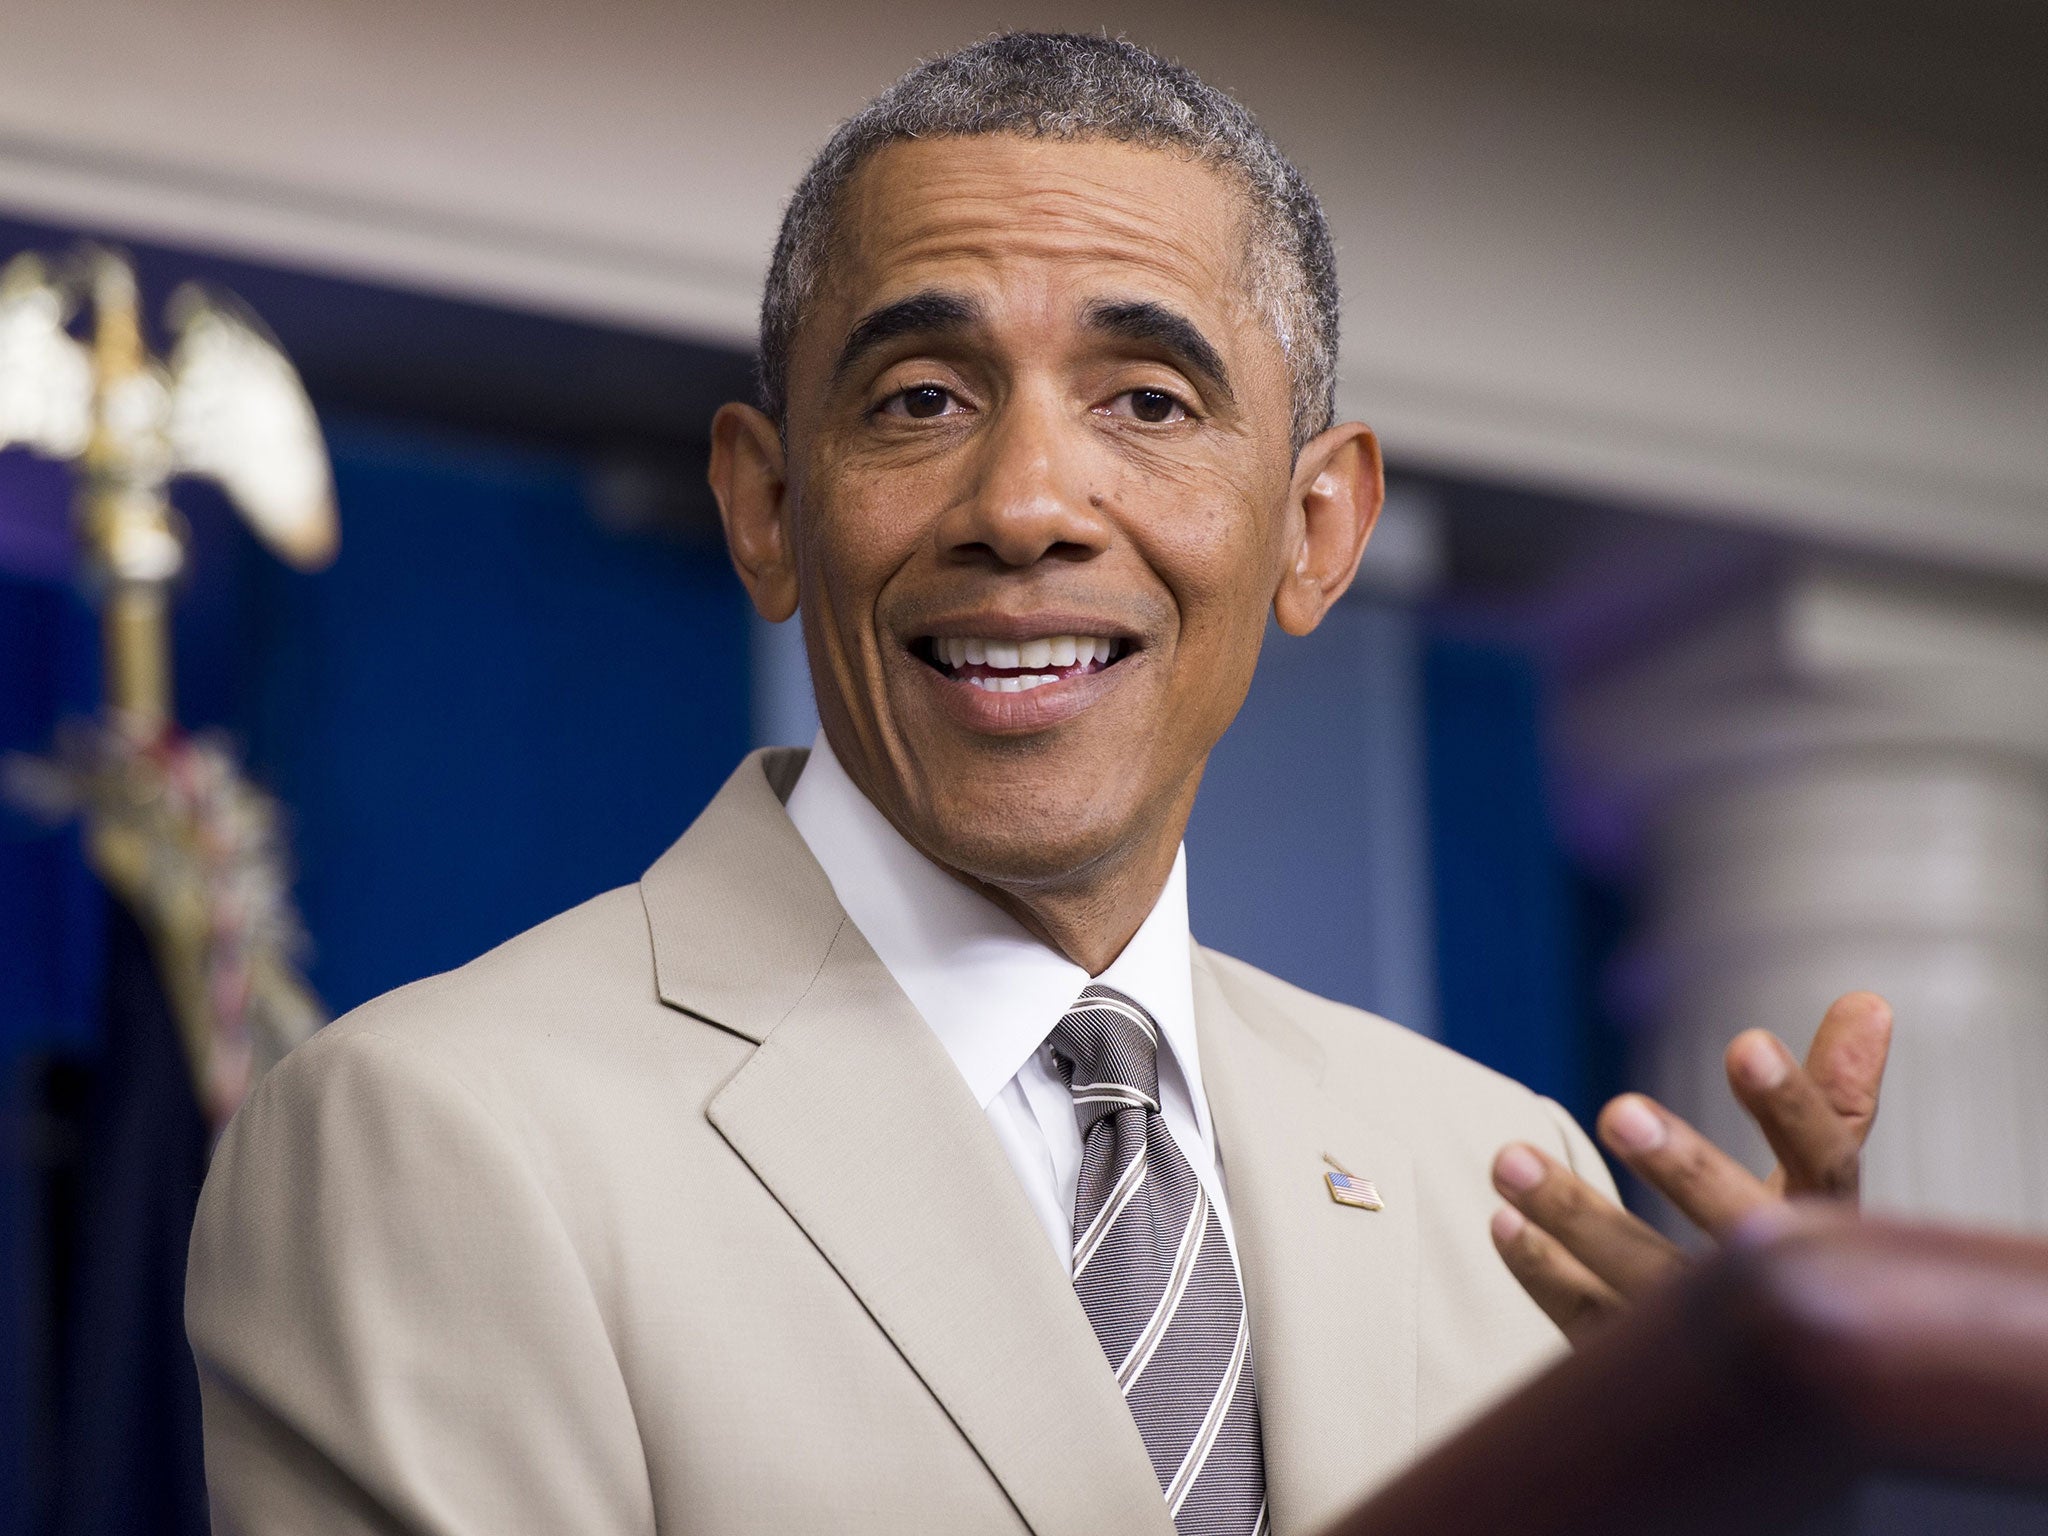 US President Barack Obama holds a press conference in the Press Briefing Room at the White House on August 28, 2014